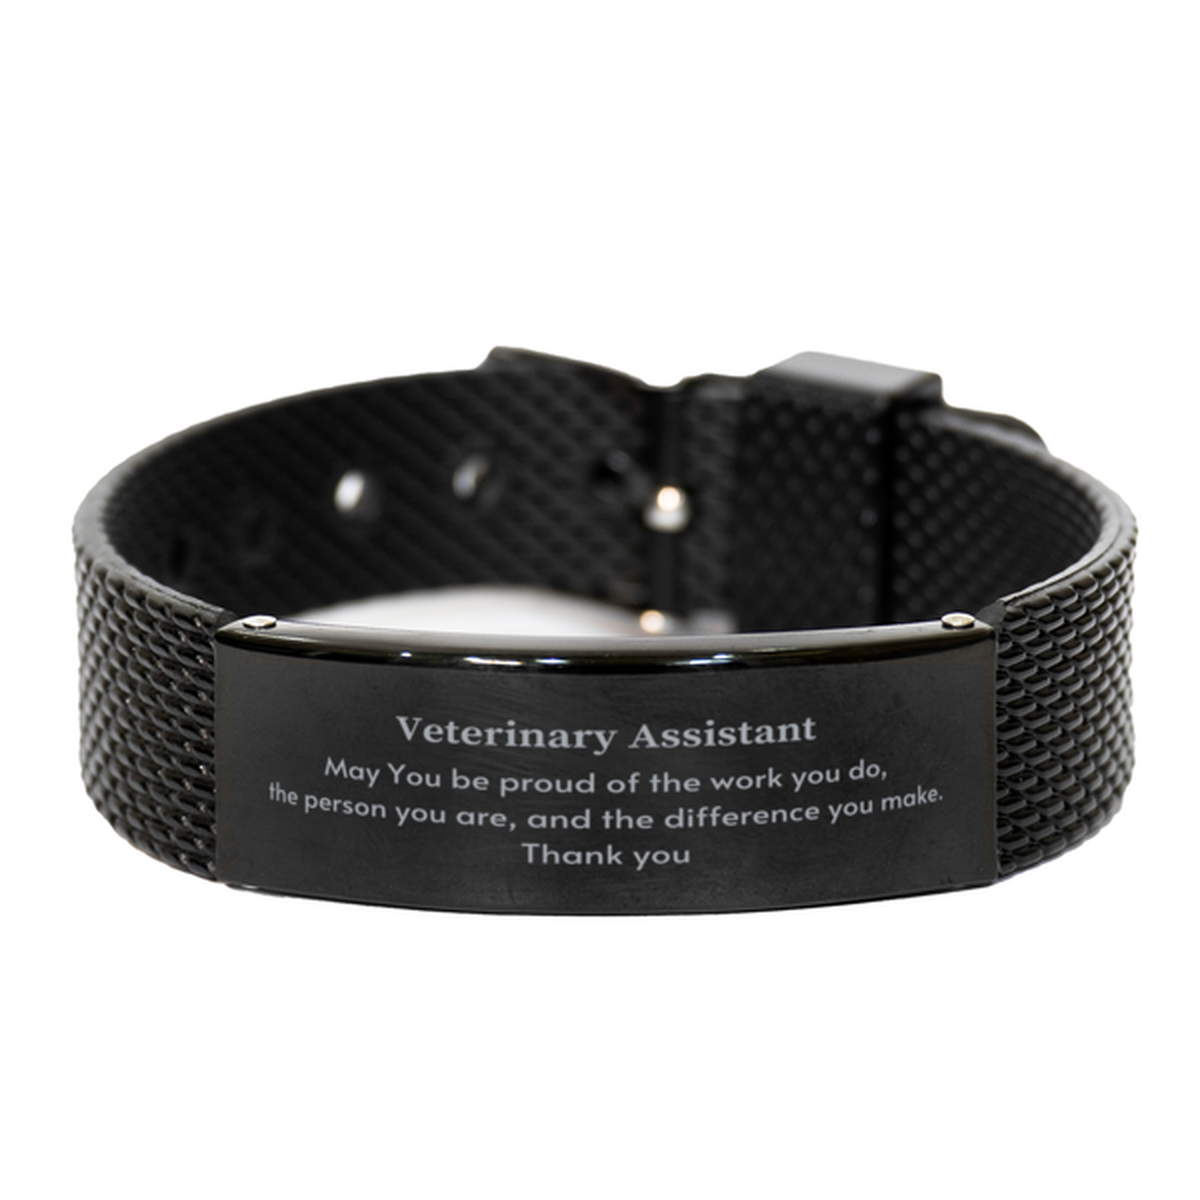 Heartwarming Black Shark Mesh Bracelet Retirement Coworkers Gifts for Veterinary Assistant, Veterinary Assistant May You be proud of the work you do, the person you are Gifts for Boss Men Women Friends